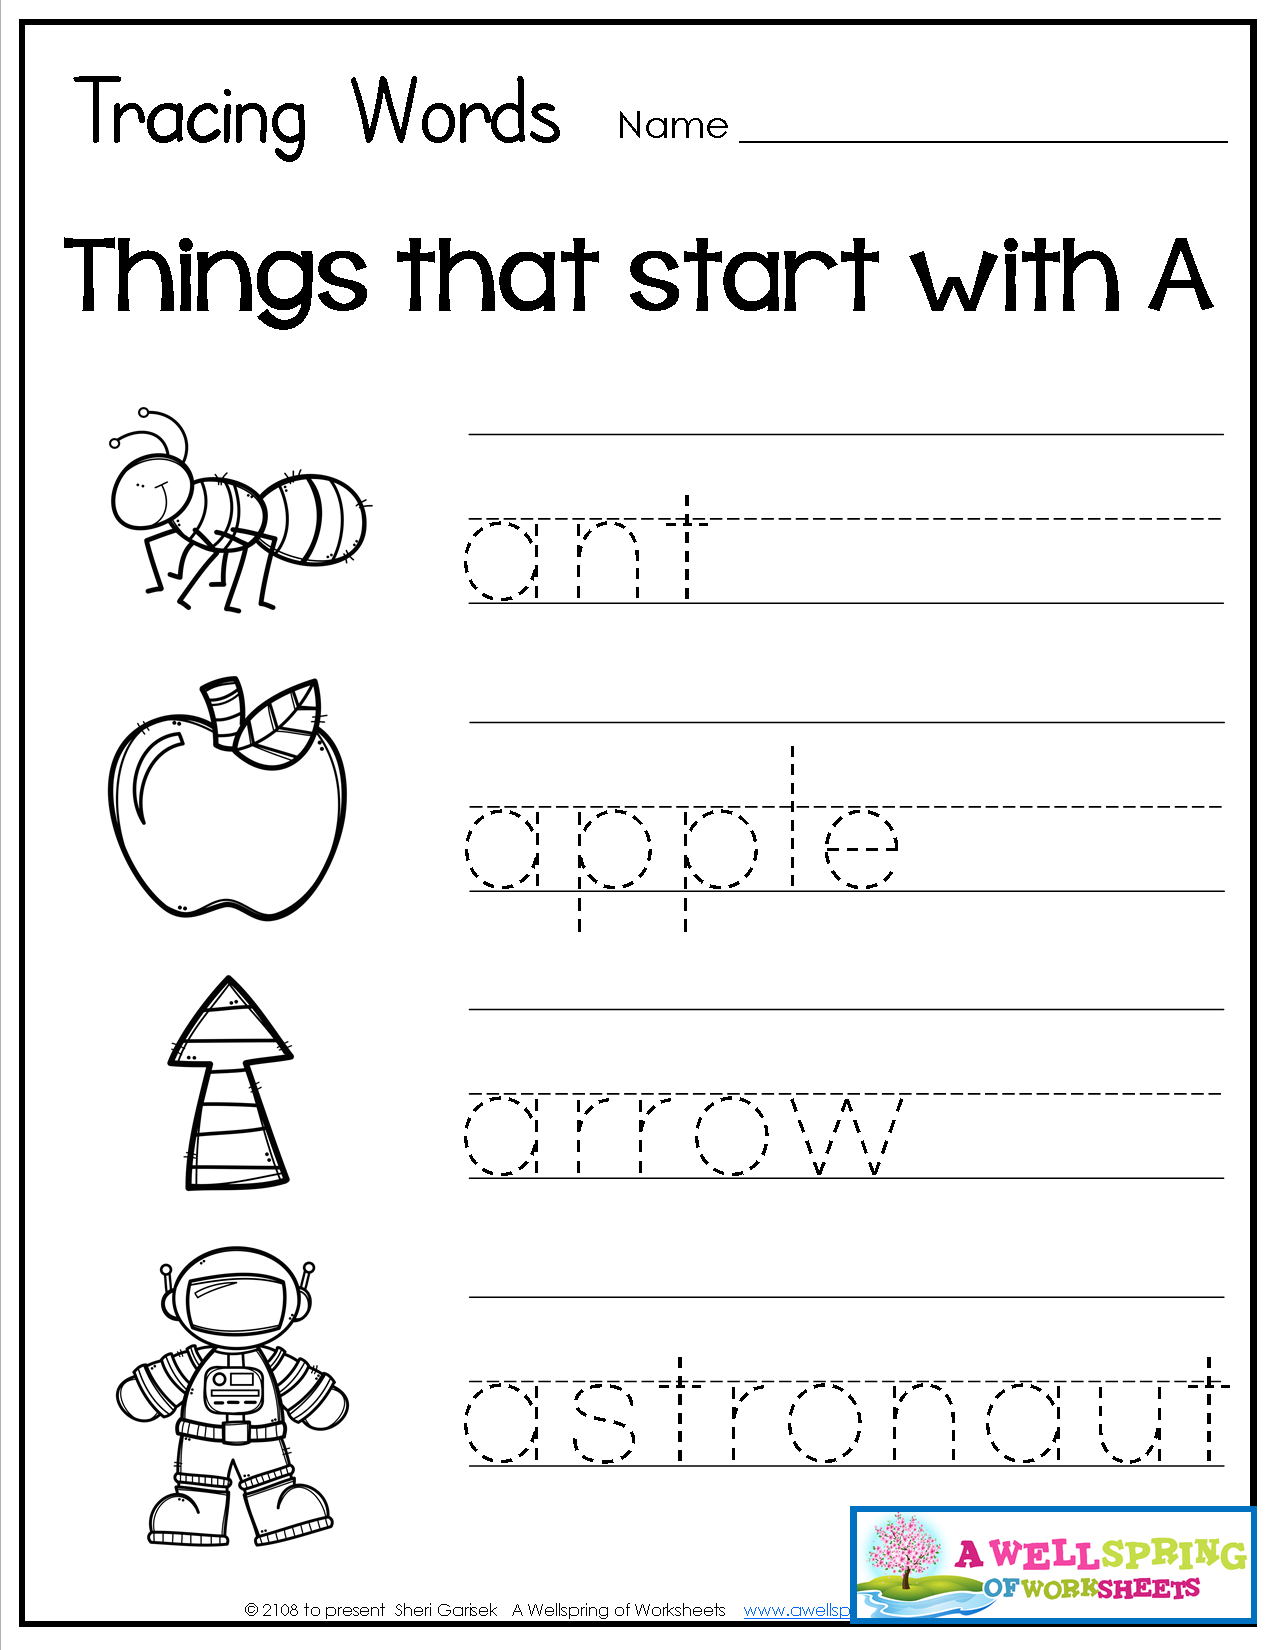 Tracing Words - Things That Start With A-Z | Teaching with regard to Tracing Letters Words Worksheets